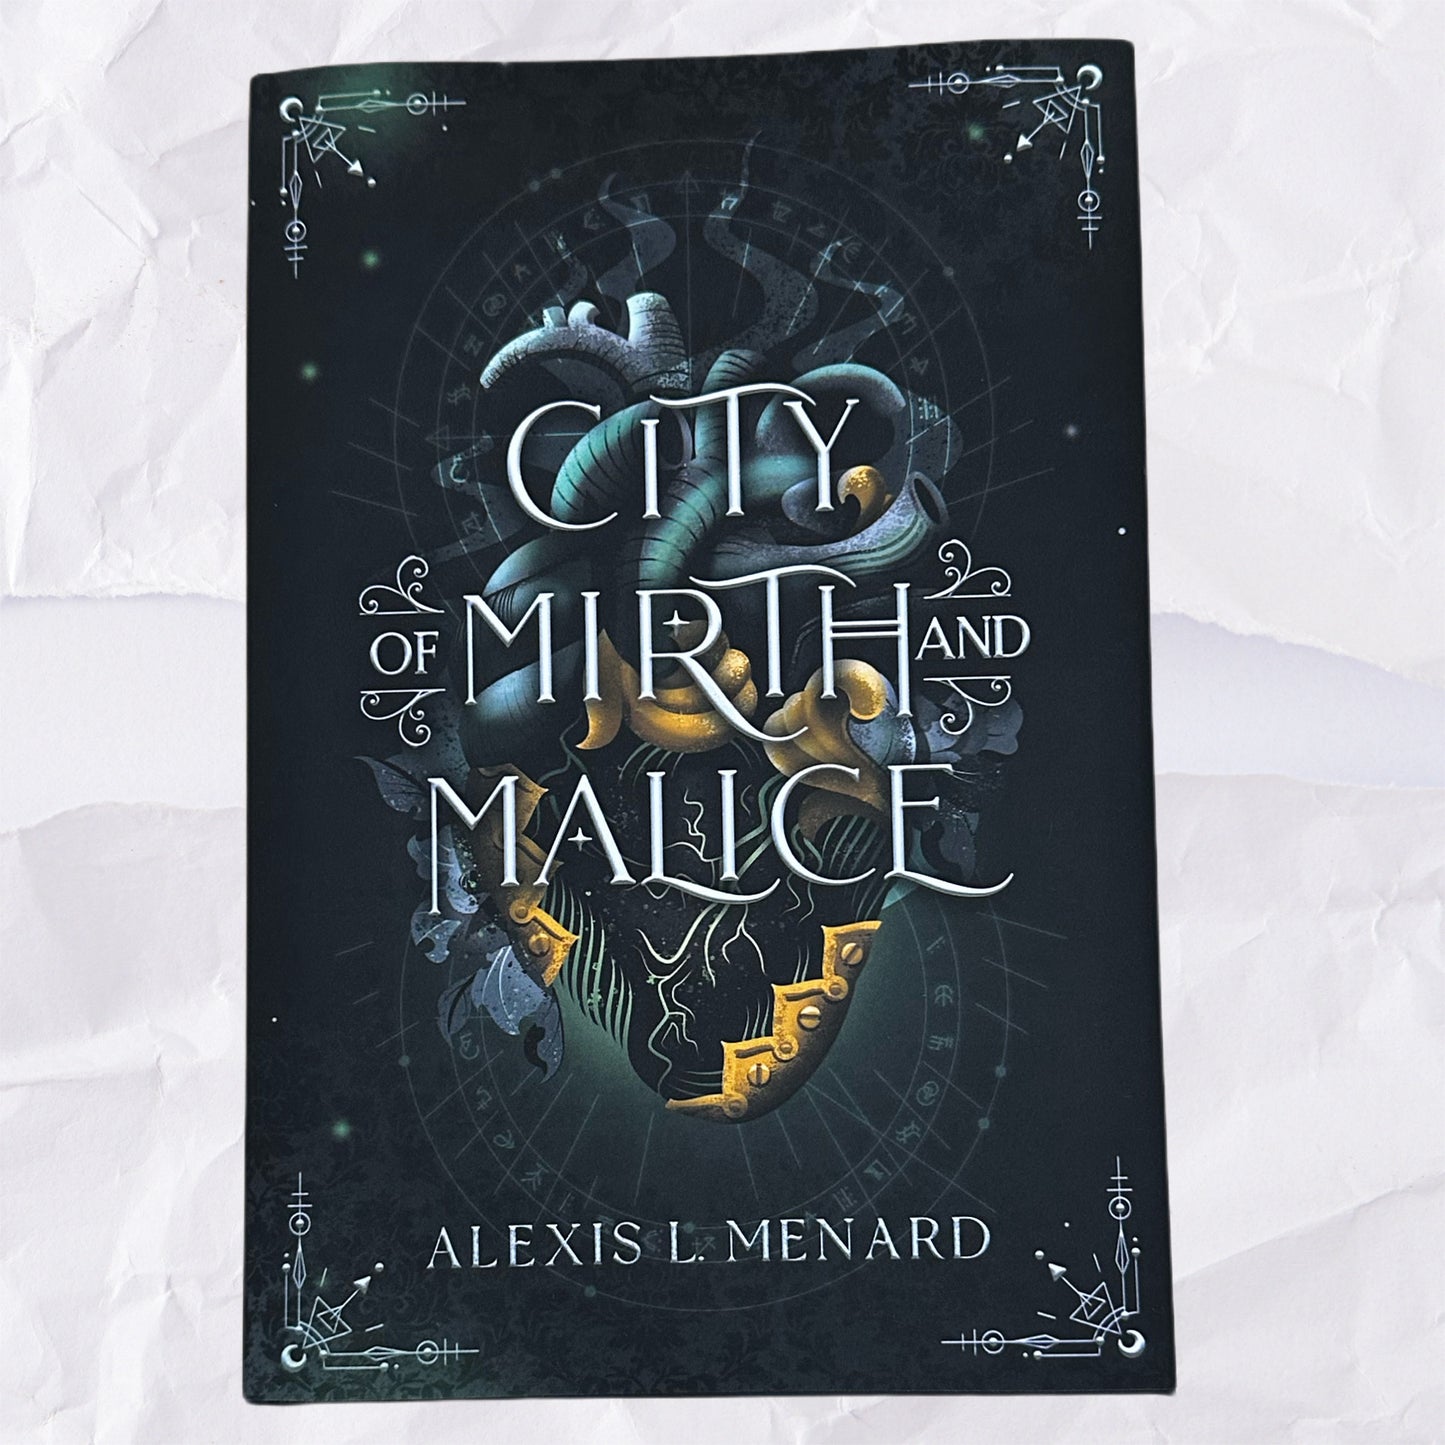 City of Mirth and Malice (Order and Chaos #2) by Alexis L. Menard - Hardcover